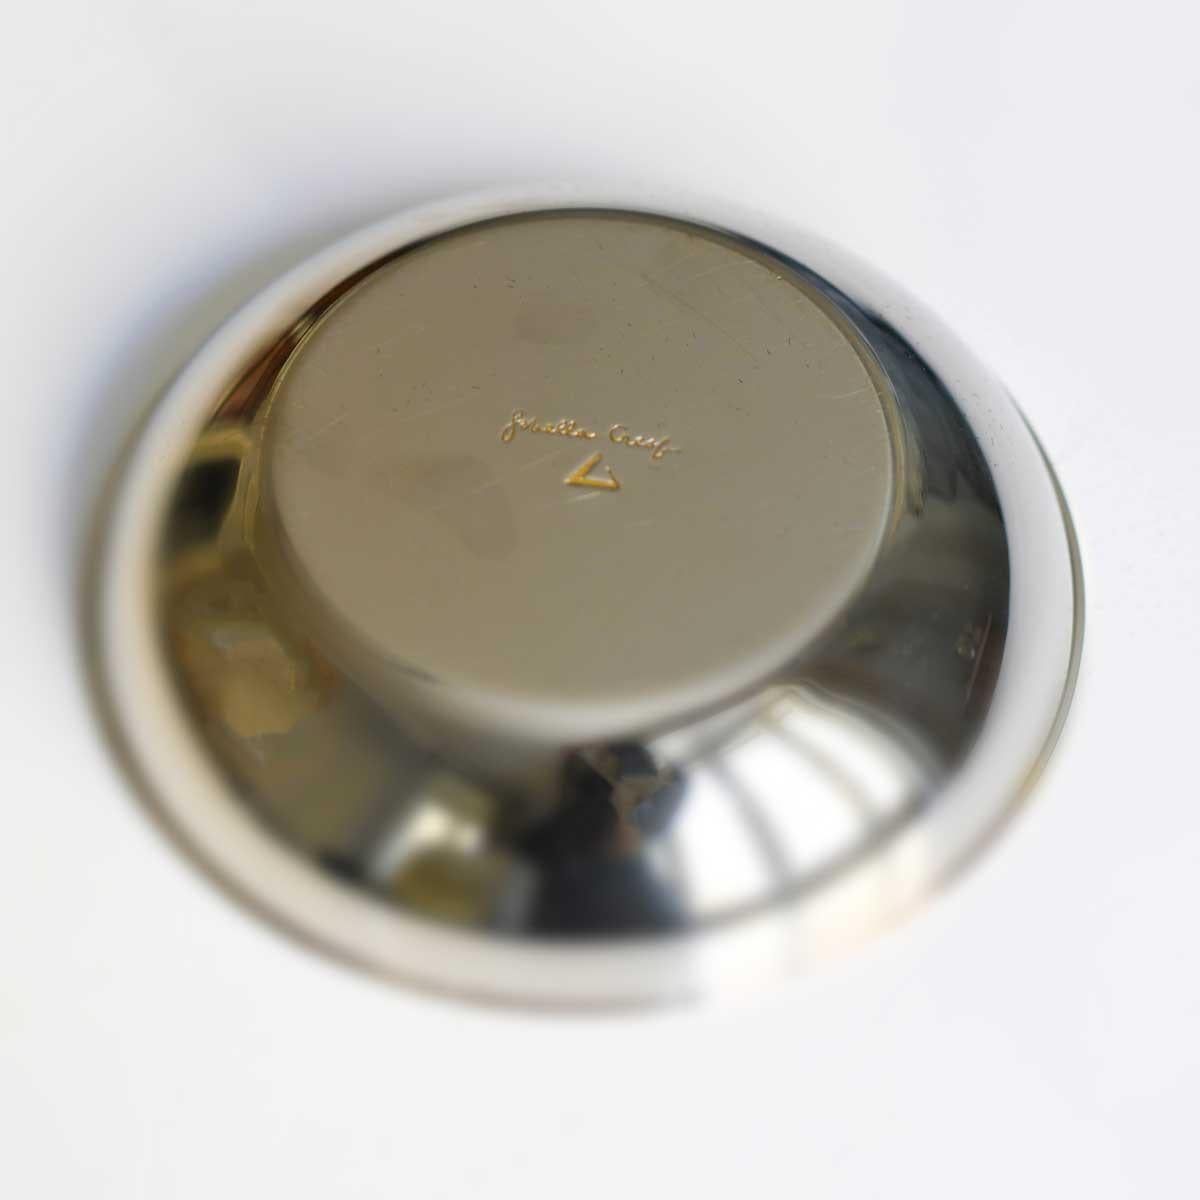 Windproof Ashtray made in nickel-plated brass with signature on the bottom.
Design and Production: Gabriella Crespi
Date of creation: 1973. 
Posted in the Gabriella Crespi Archive at No. 100439044